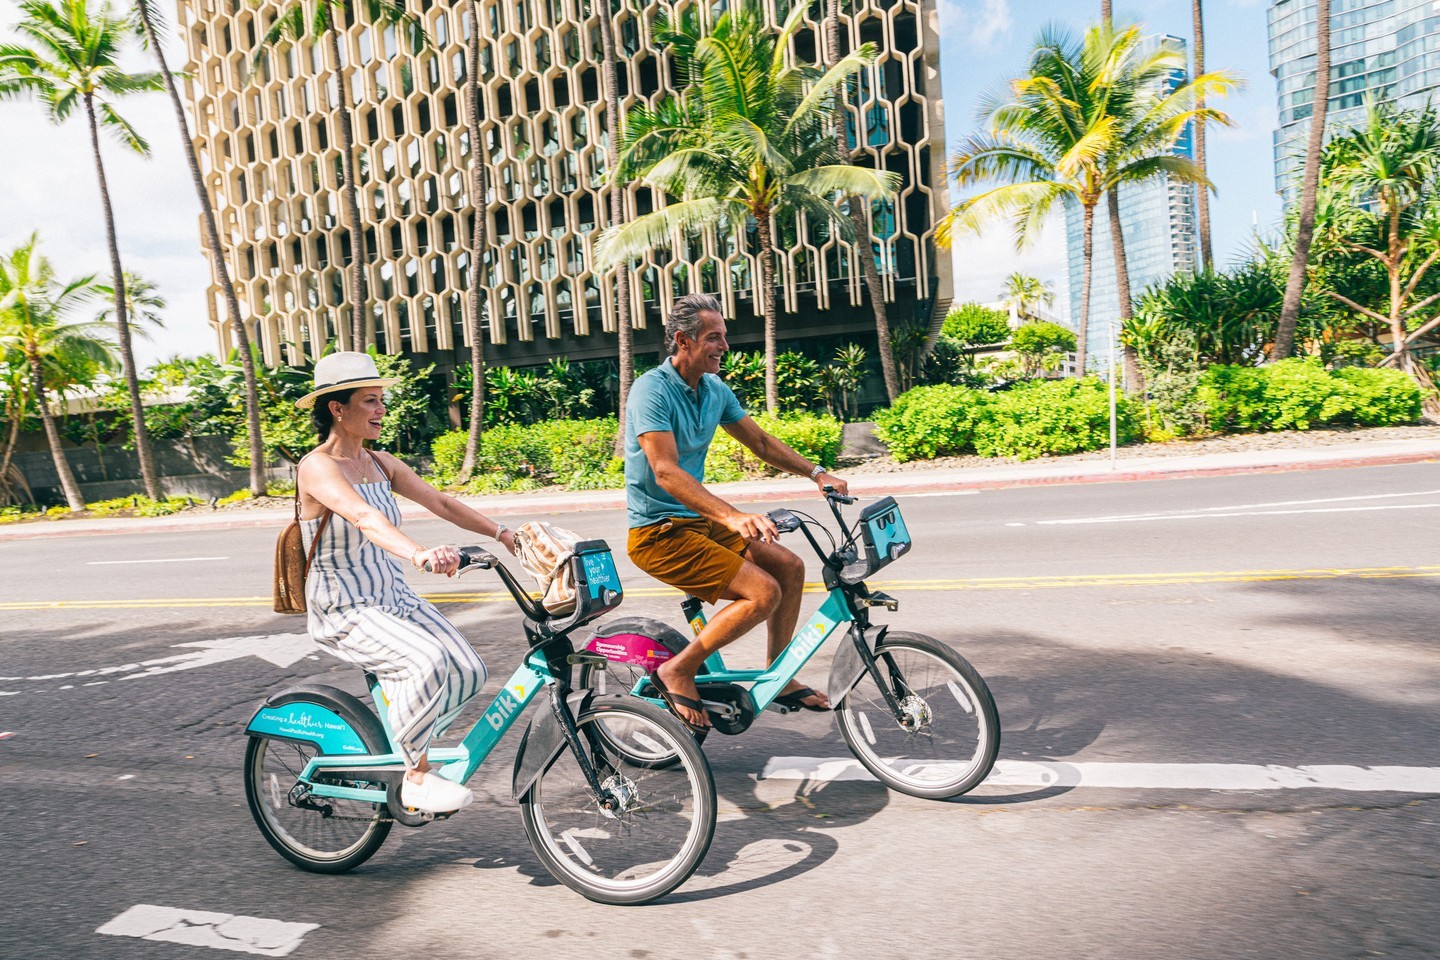 Whether you’re pedaling a @gobikihi or your own two wheels, cruising Ward Village is a healthy and fun way to enjoy our neighborhood.